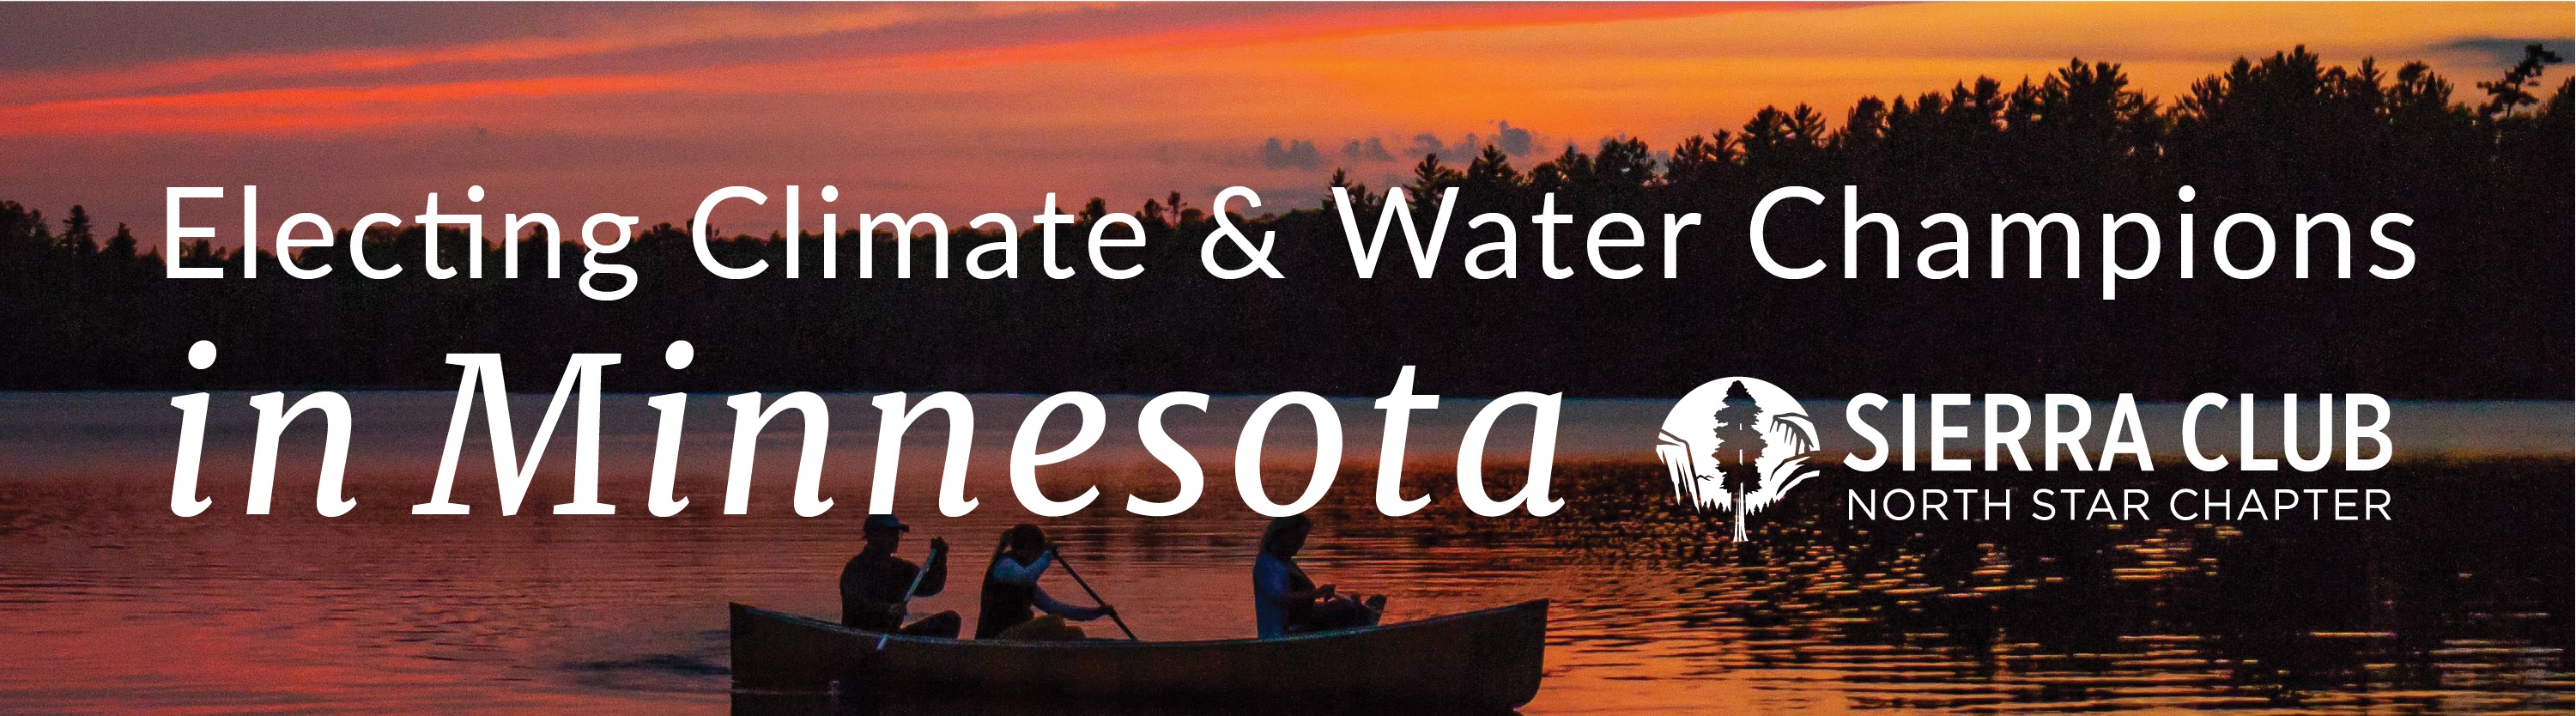 banner: Electing Climate & Water Champions in Minnesota